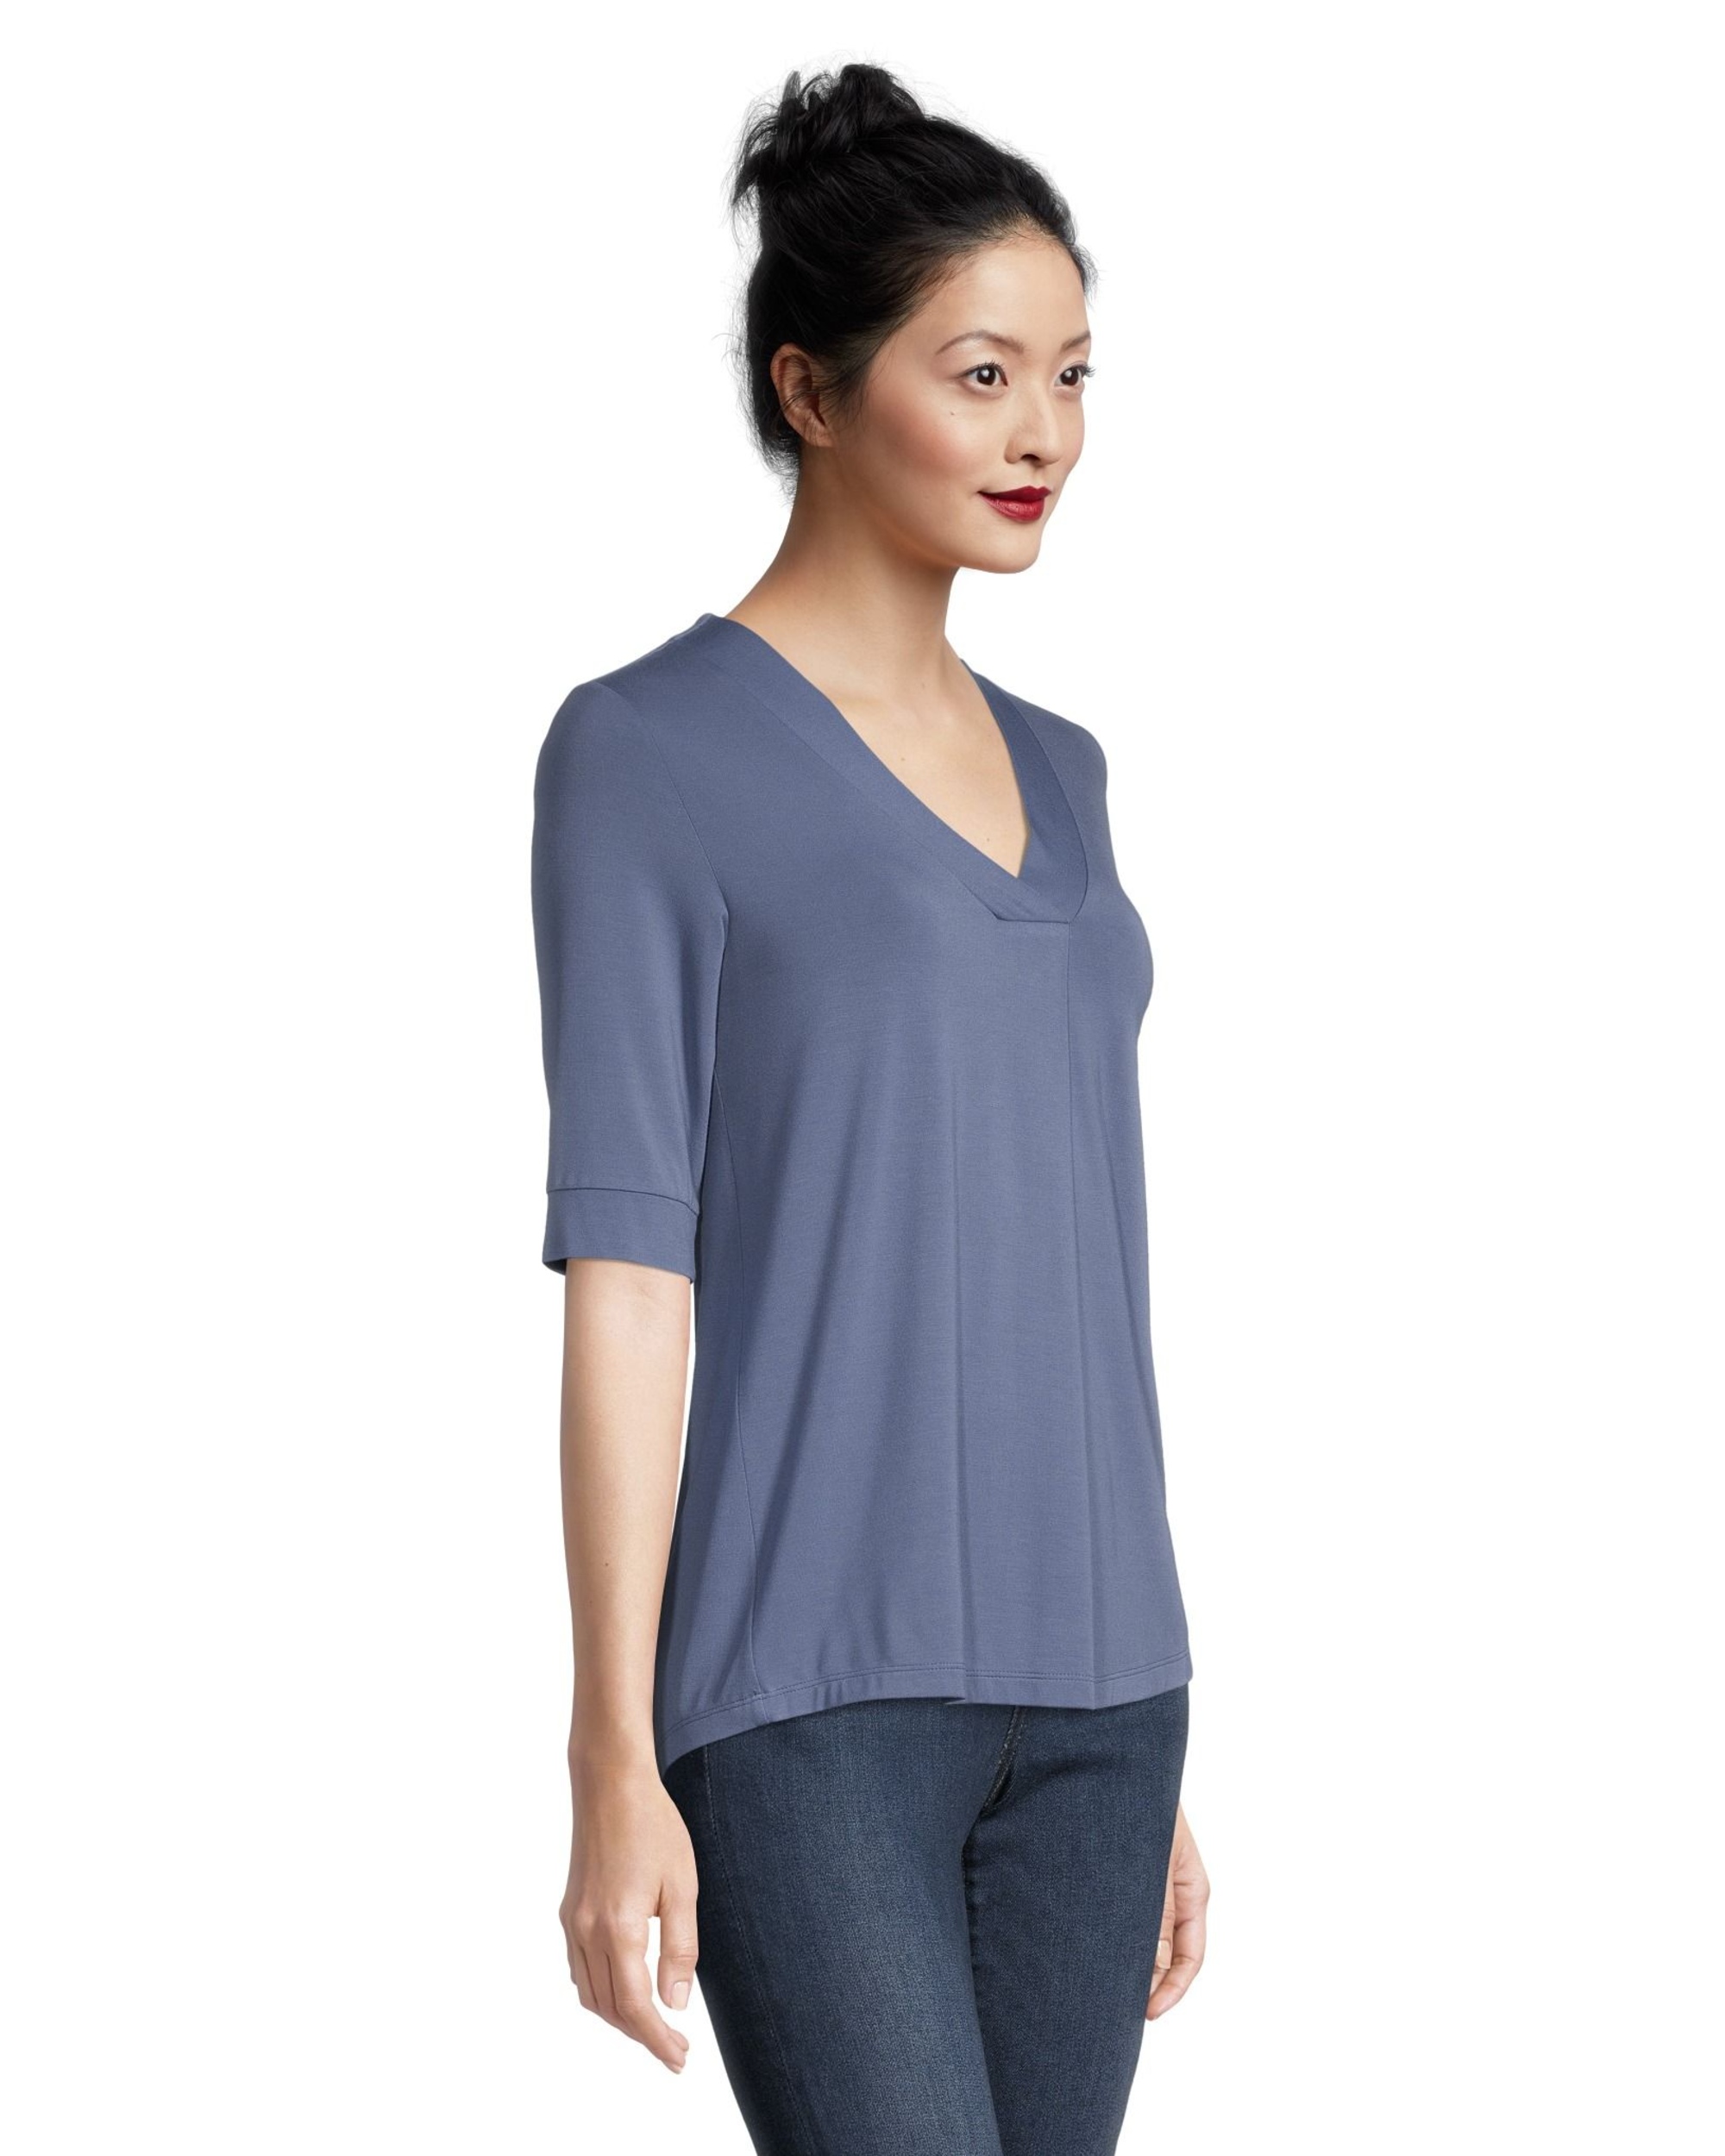 Denver Hayes Women's Pleat Detail Relaxed Fit V-Neck Top | Marks